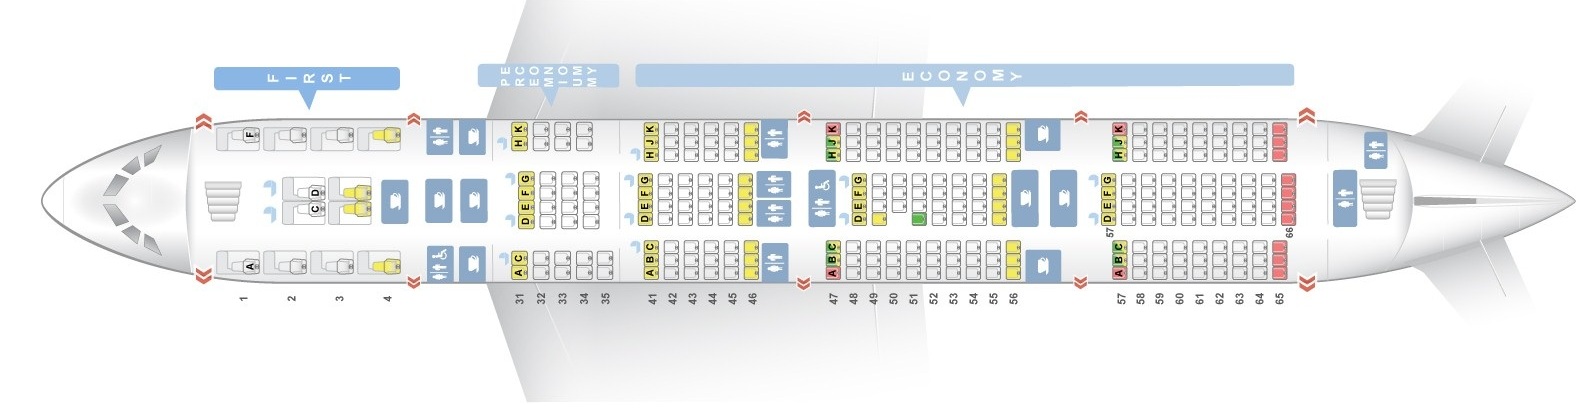 Seat Map Airbus A Singapore Airlines Best Seats In Plane Hot